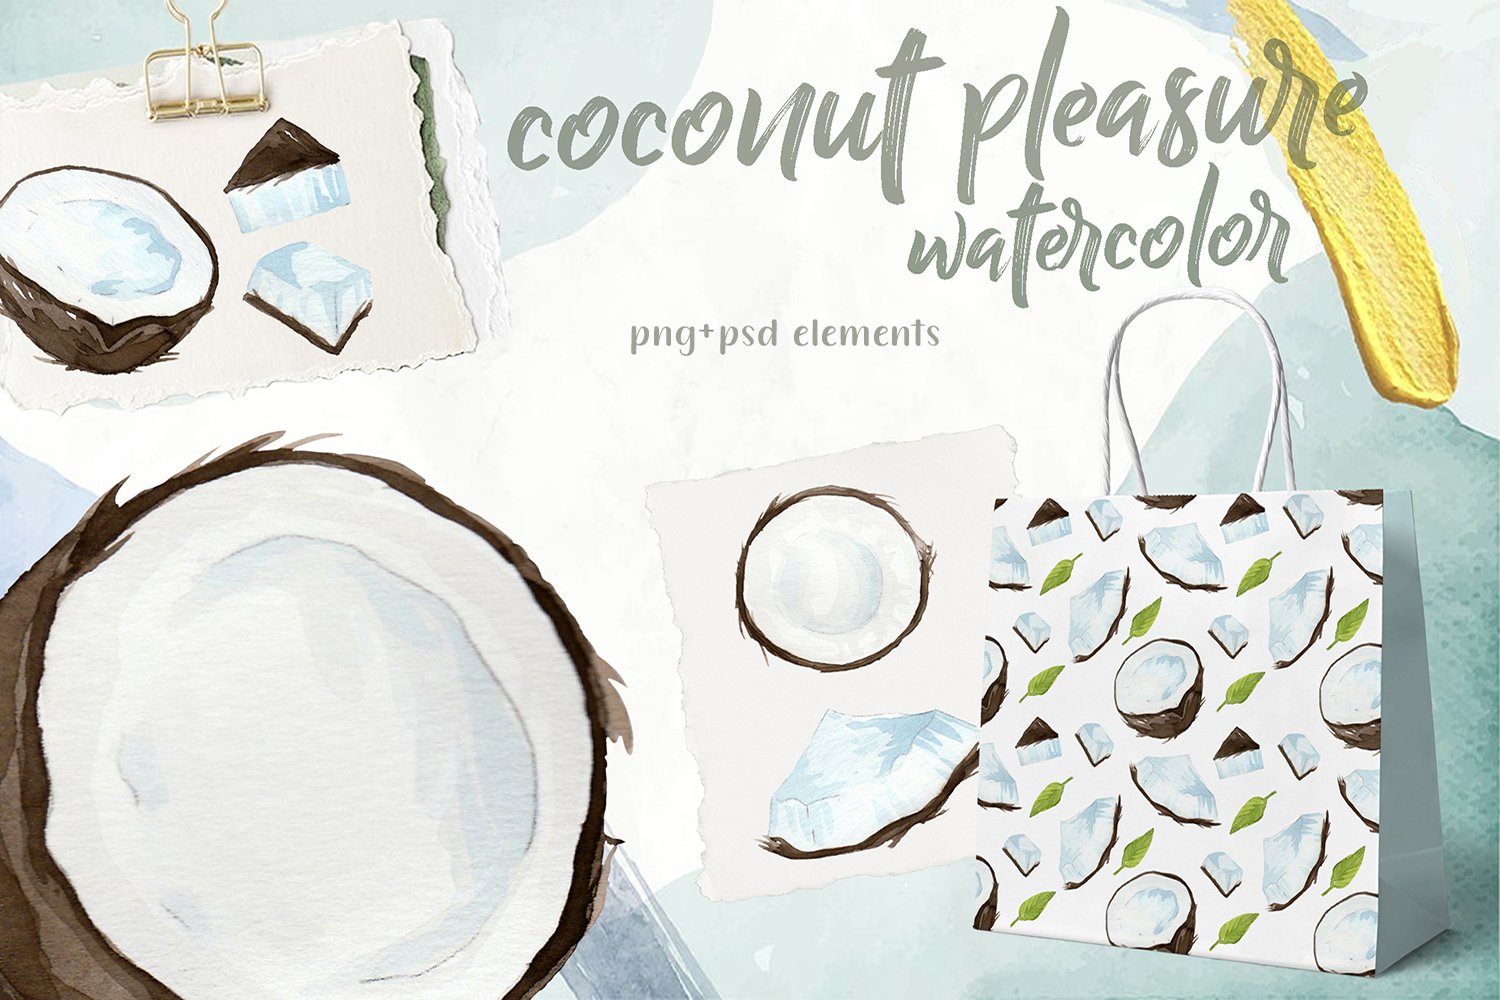 So cool and realistic coconut illustrations.